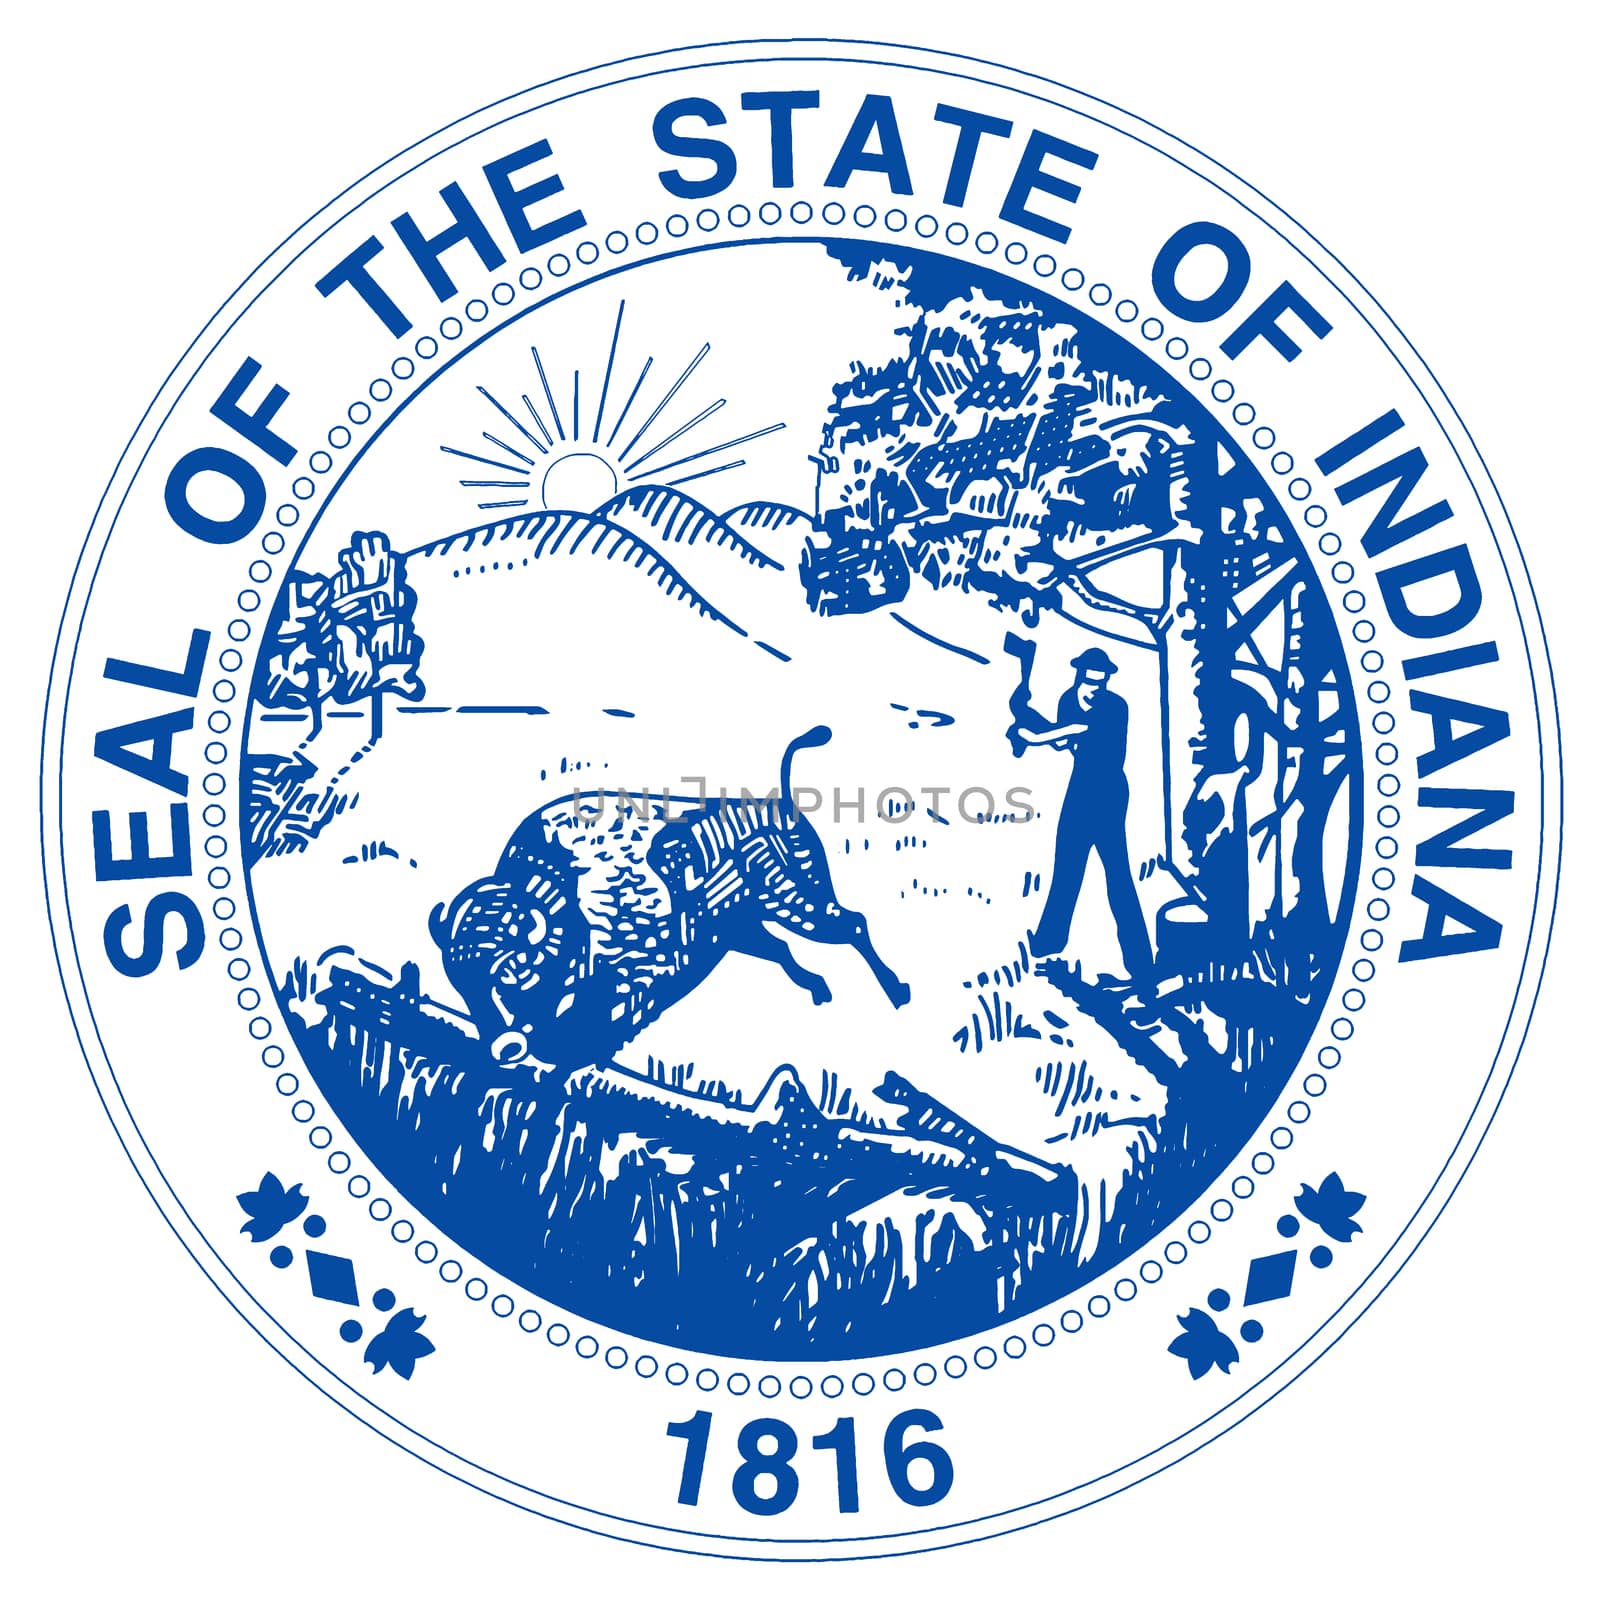 The great seal of the state of Indiana